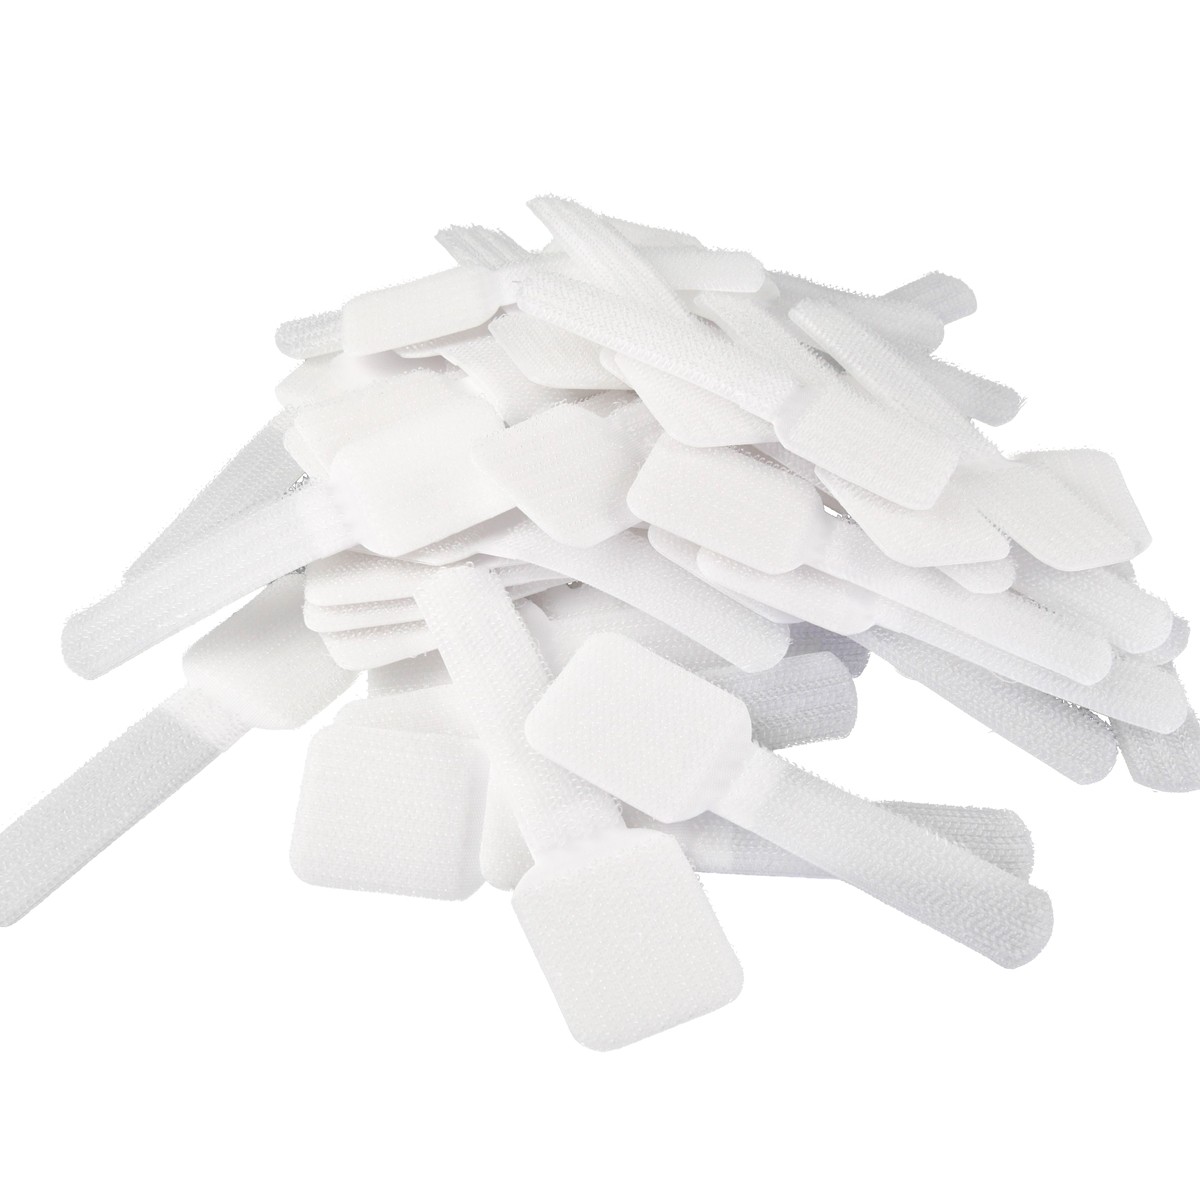 LTC - LTC Pro Wall, Cable Management Clips Self-Adhesive (white)